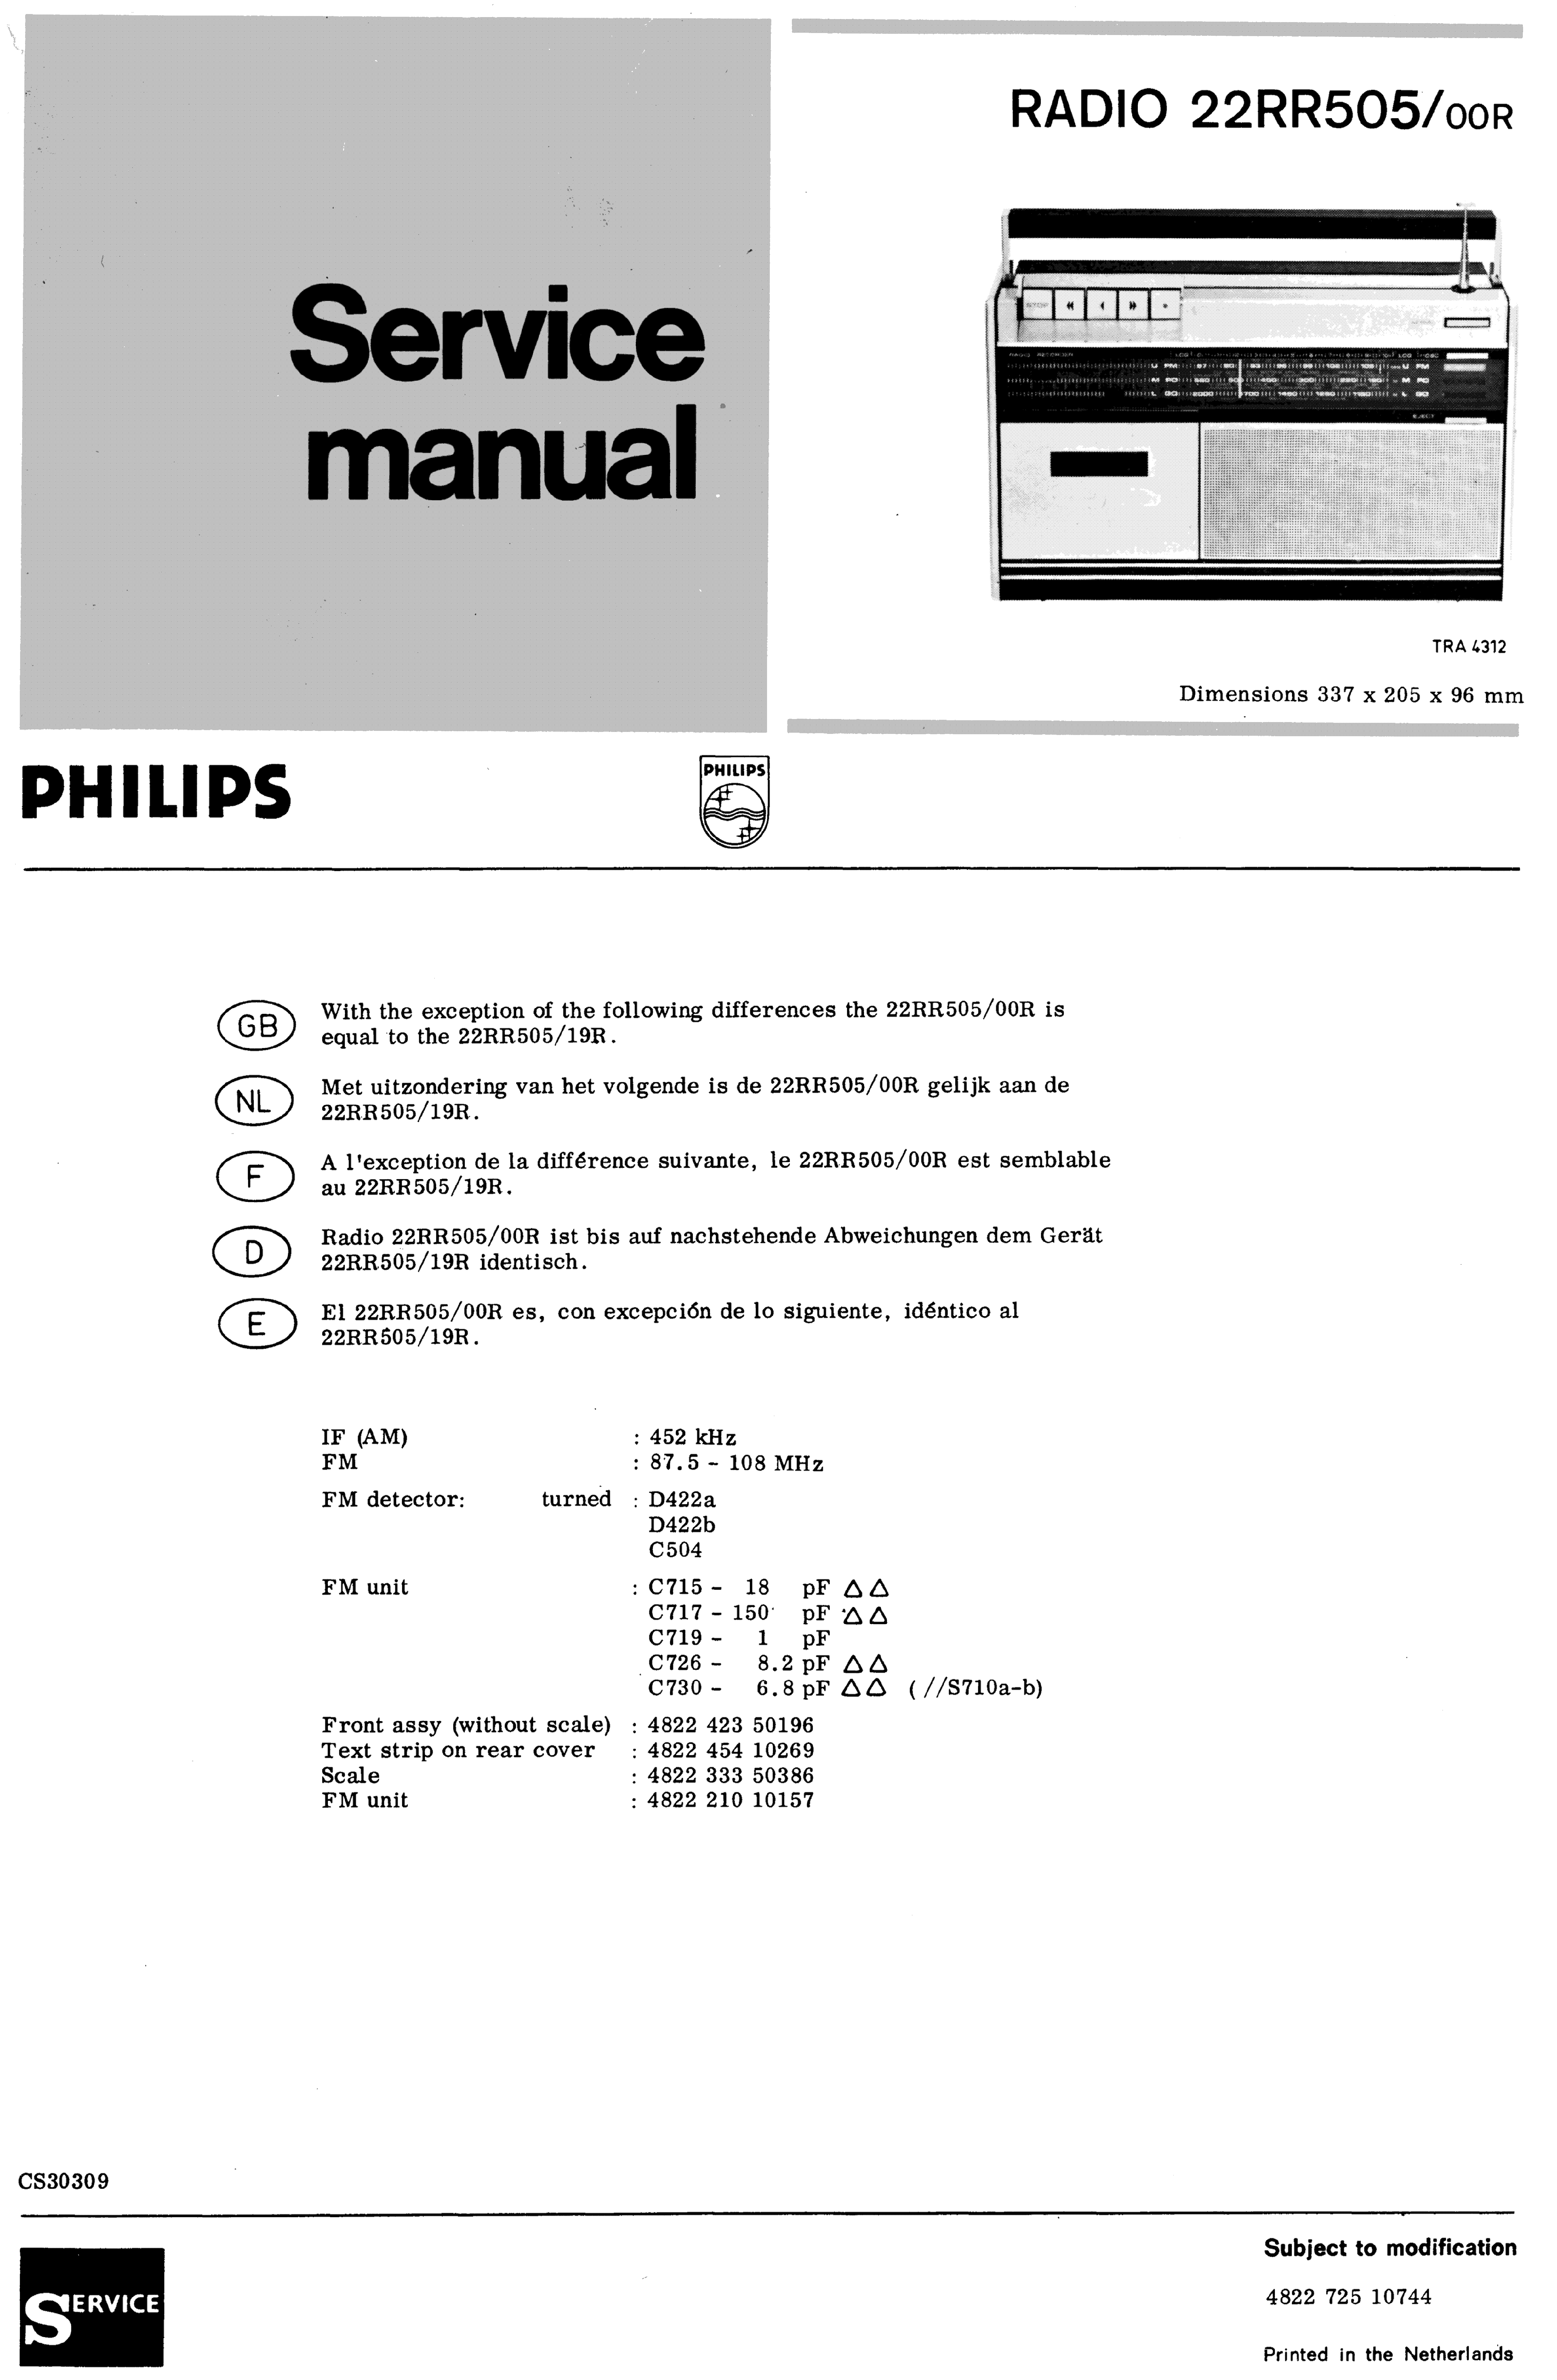 PHILIPS RADIO 22RR505 SM service manual (1st page)